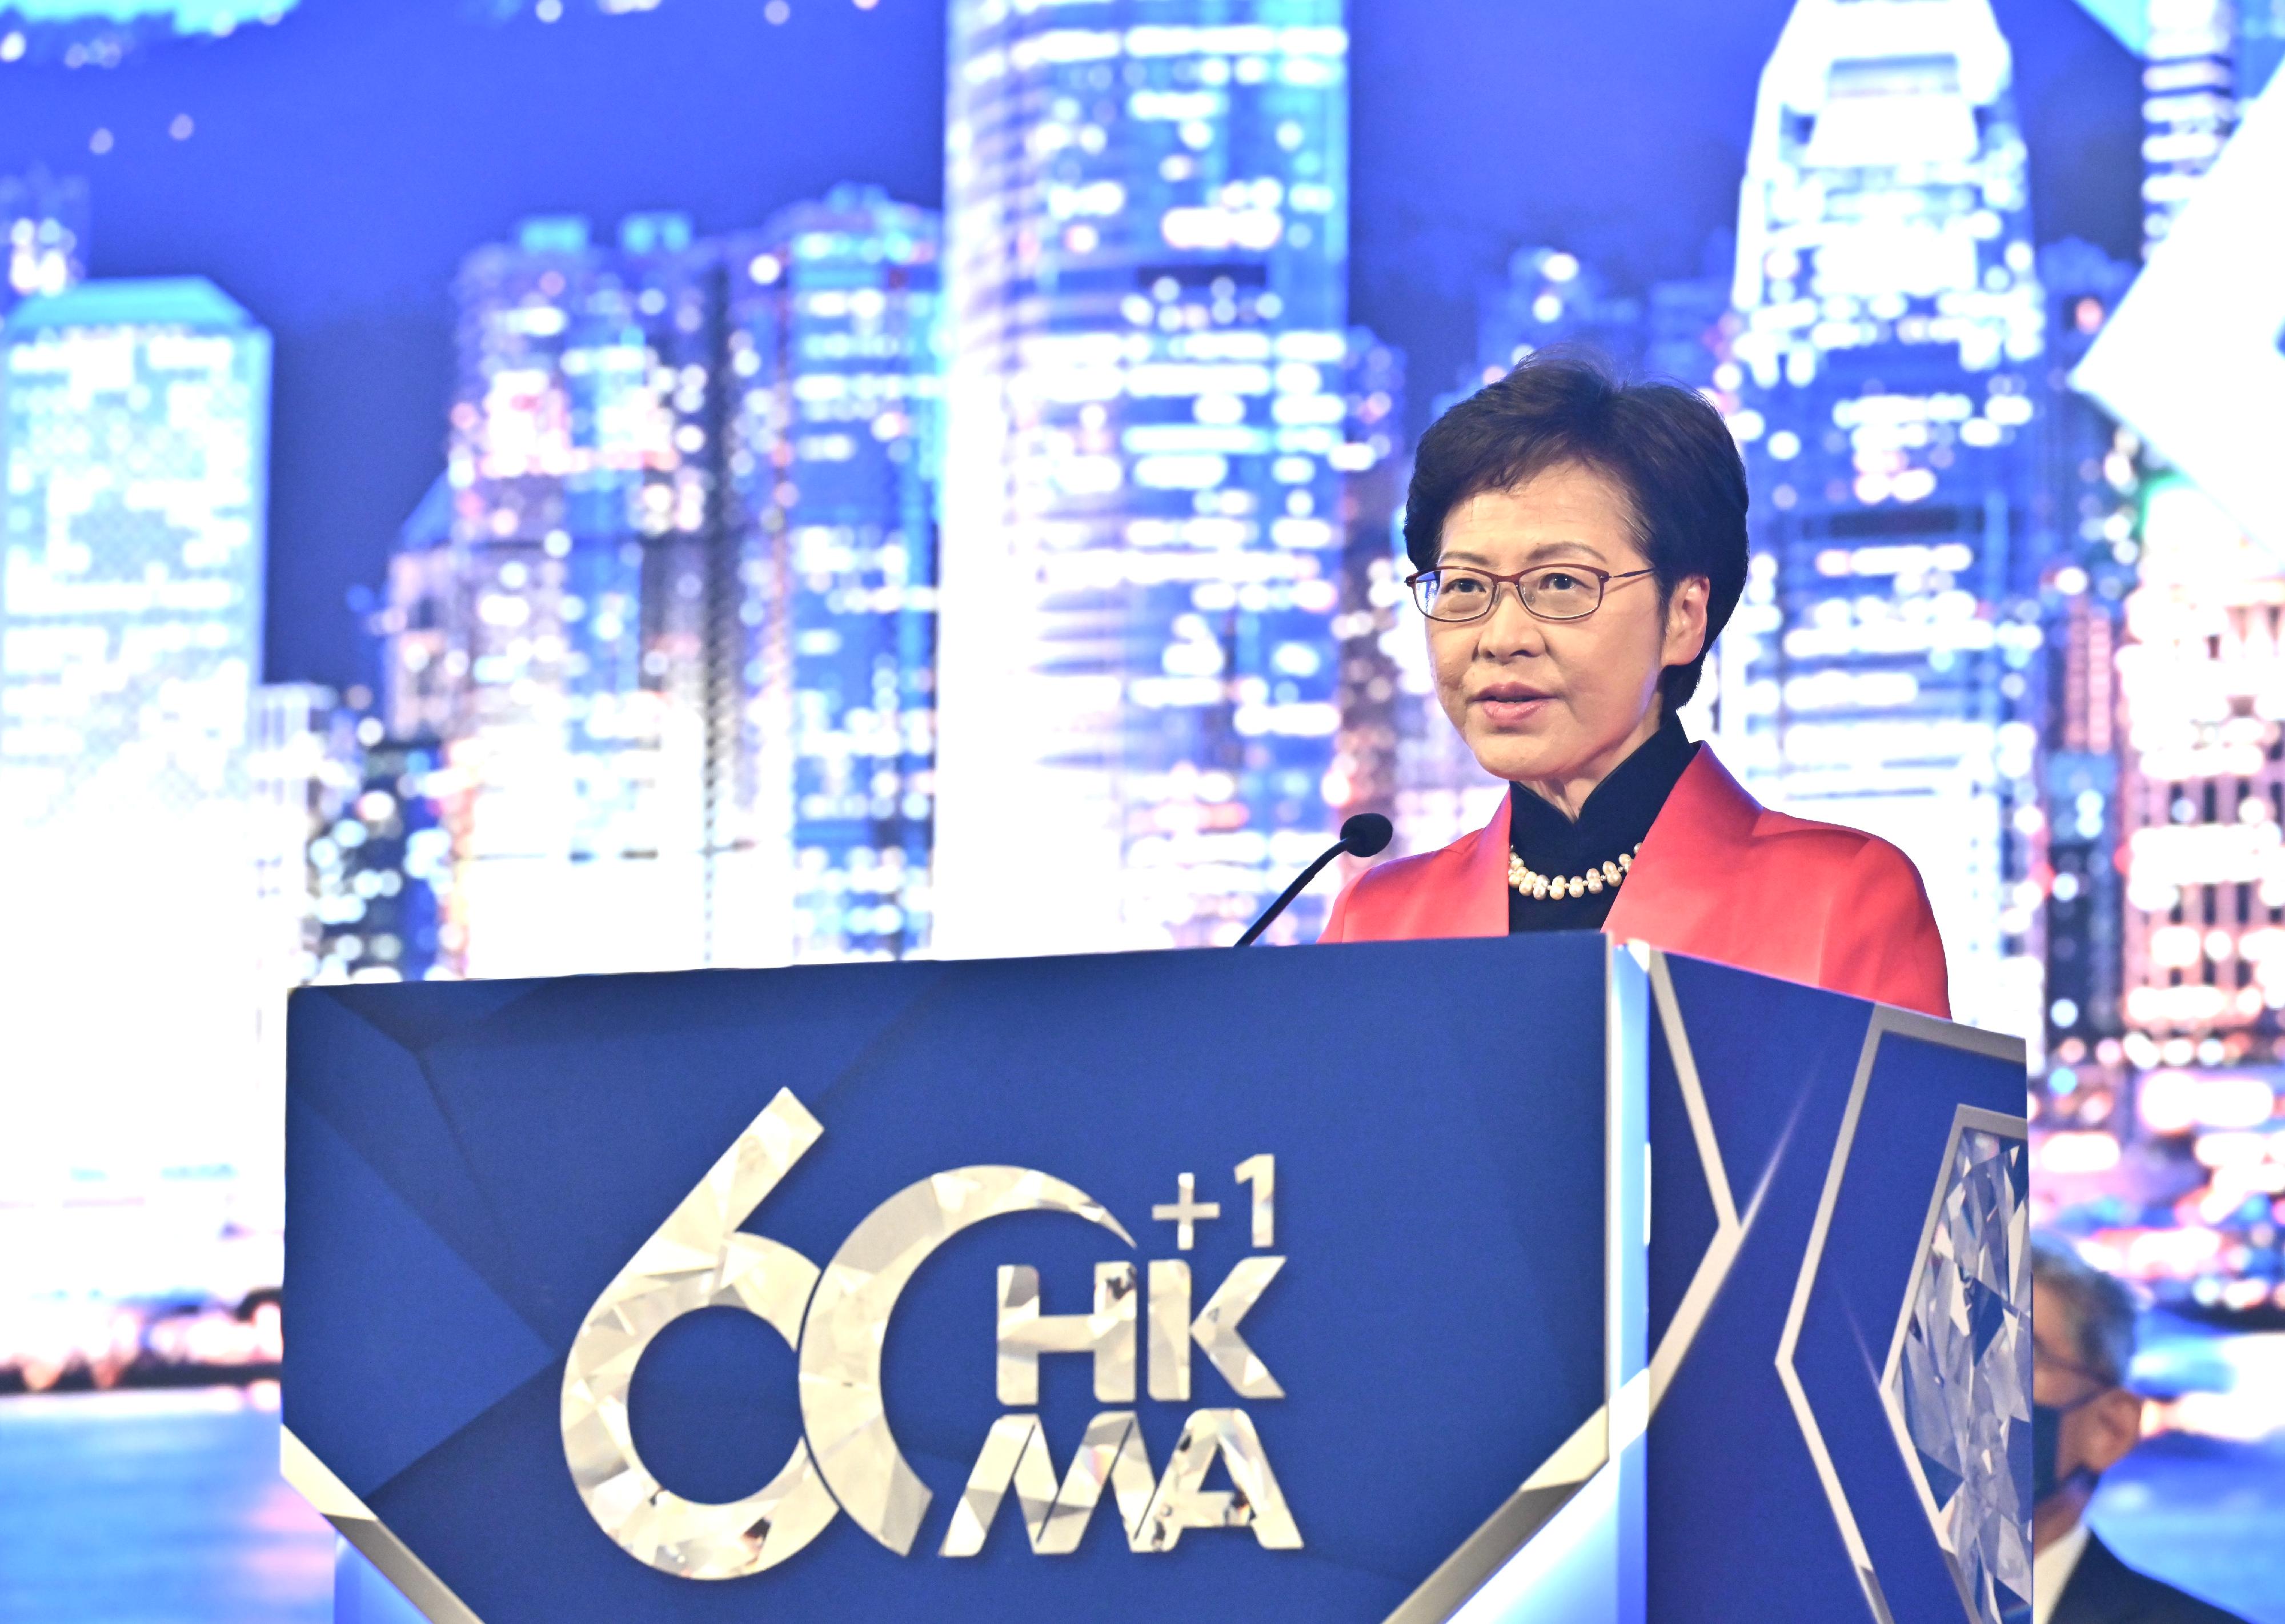 The Chief Executive, Mrs Carrie Lam, speaks at the Hong Kong Management Association 60th+1 Anniversary Celebration cum Hong Kong Sustainability Award Presentation Ceremony today (December 14). 